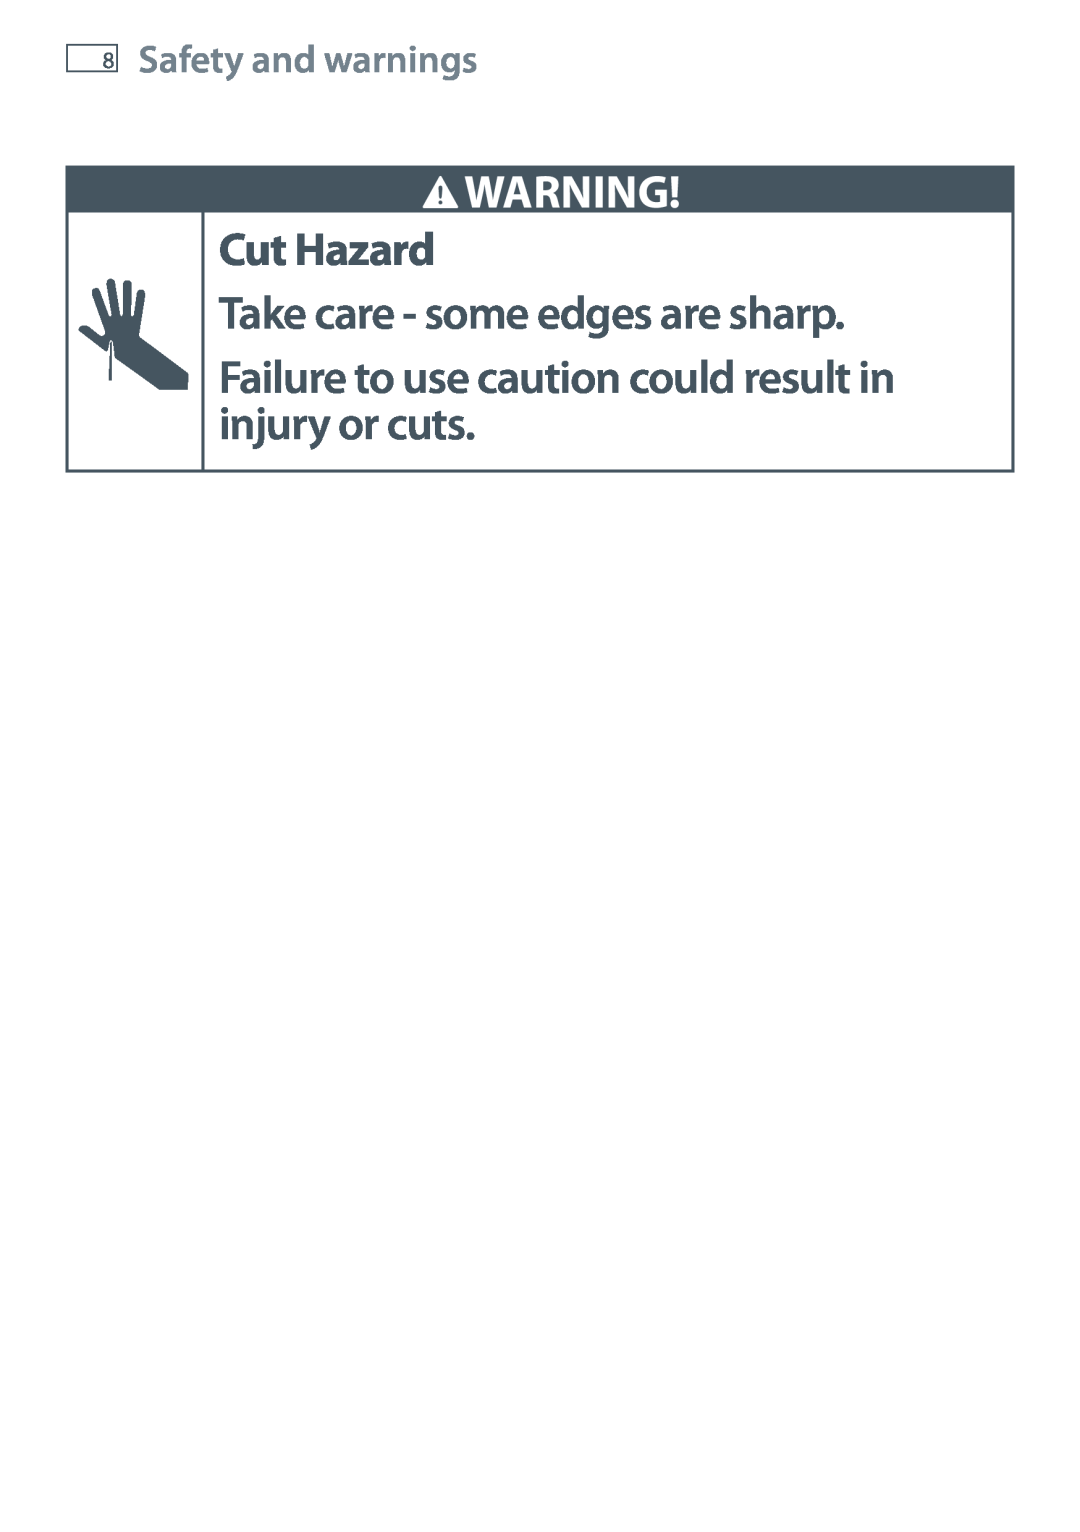 Fisher & Paykel OB60SL9 Cut Hazard Take care - some edges are sharp, Failure to use caution could result in injury or cuts 